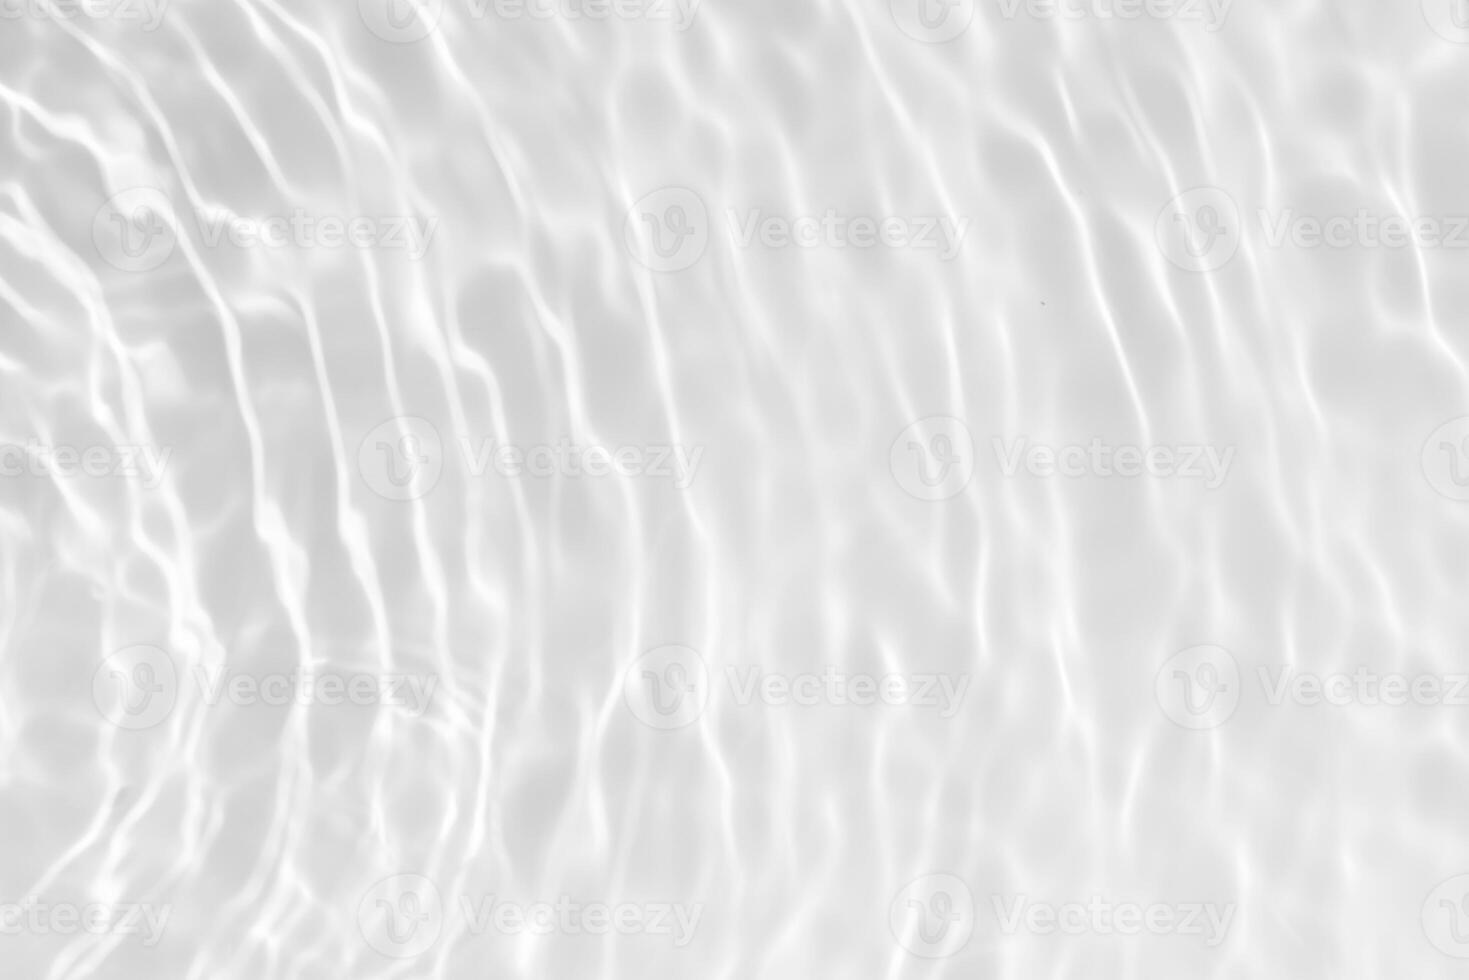 Bluewater waves on the surface ripples blurred. Defocus blurred transparent blue colored clear calm water surface texture with splash and bubbles. Water waves with shining pattern texture background. photo